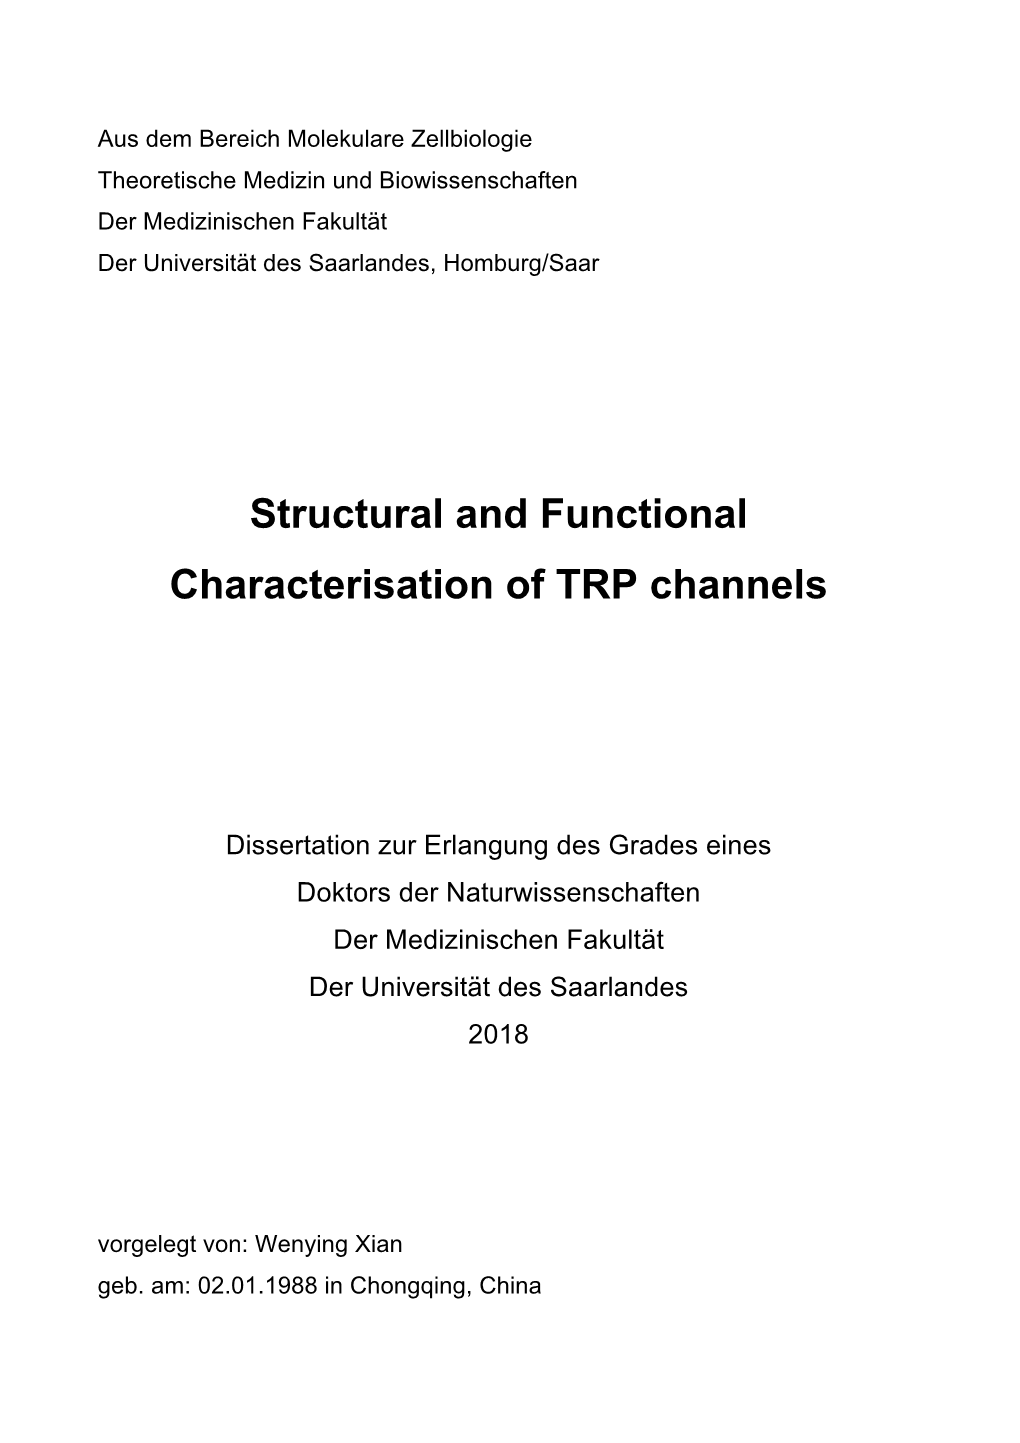 Structural and Functional Characterisation of TRP Channels